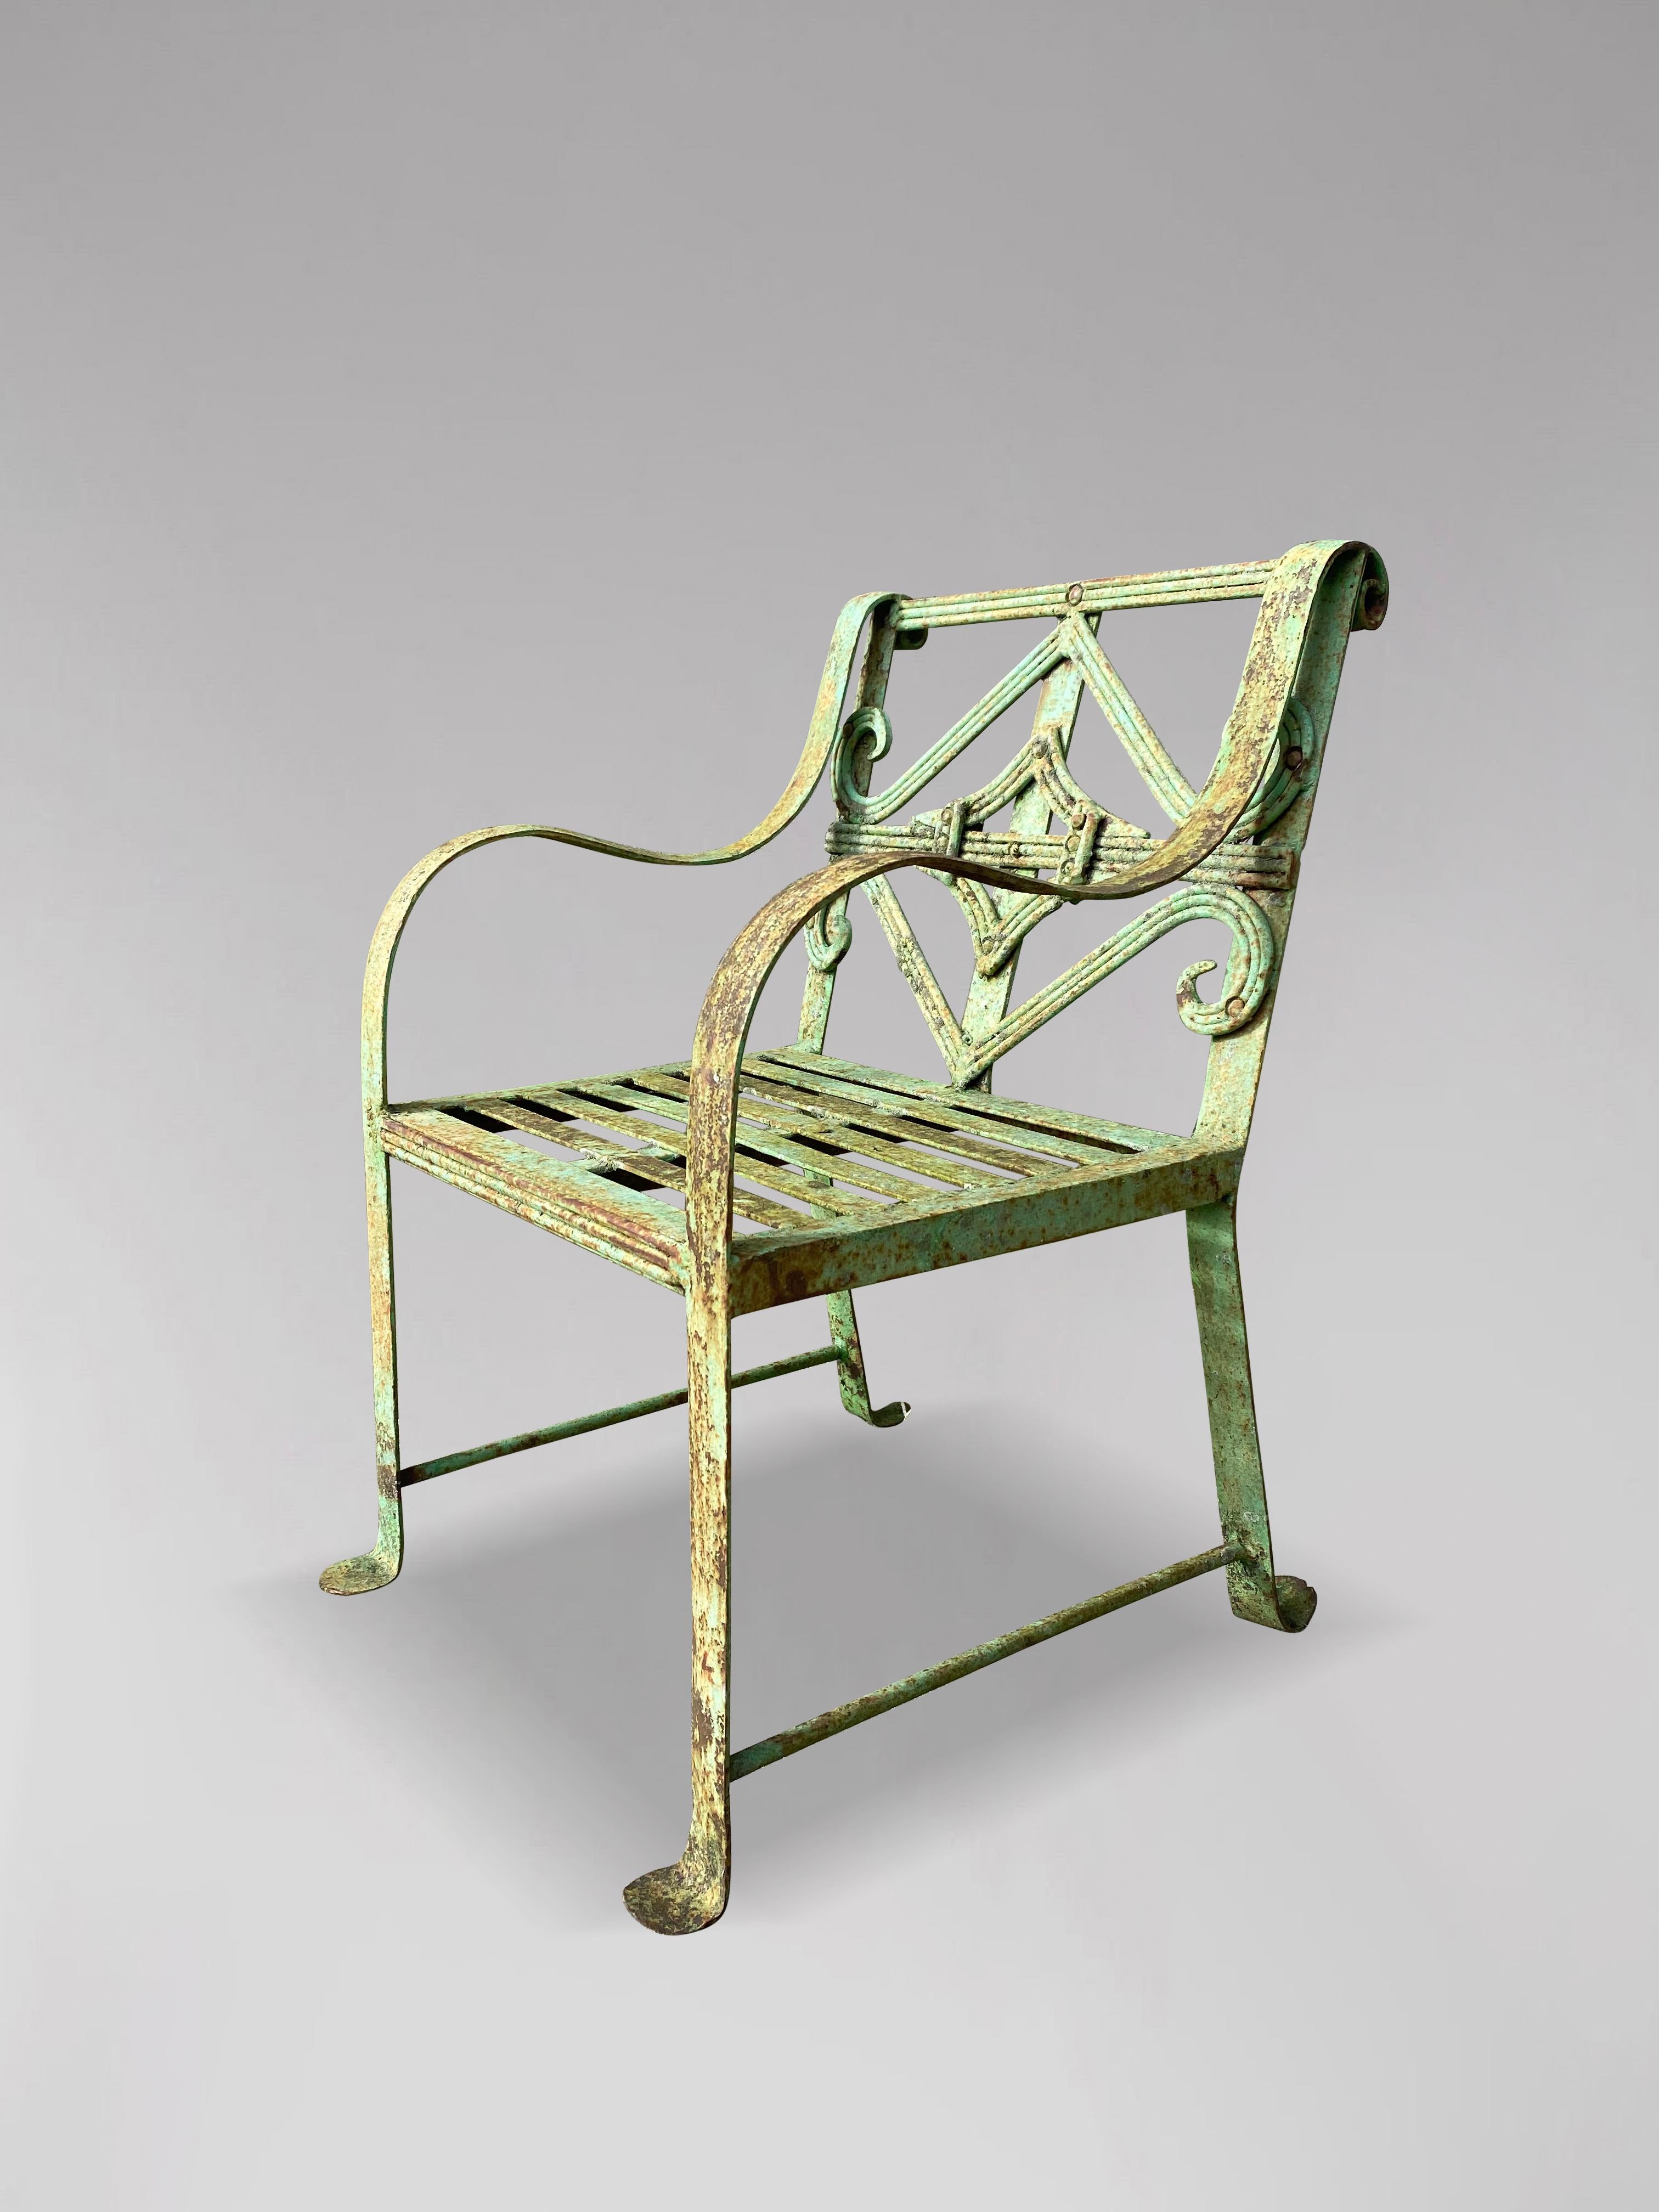 19th Century Green Painted Wrought Iron Child's Garden Suite In Good Condition In Petworth,West Sussex, GB